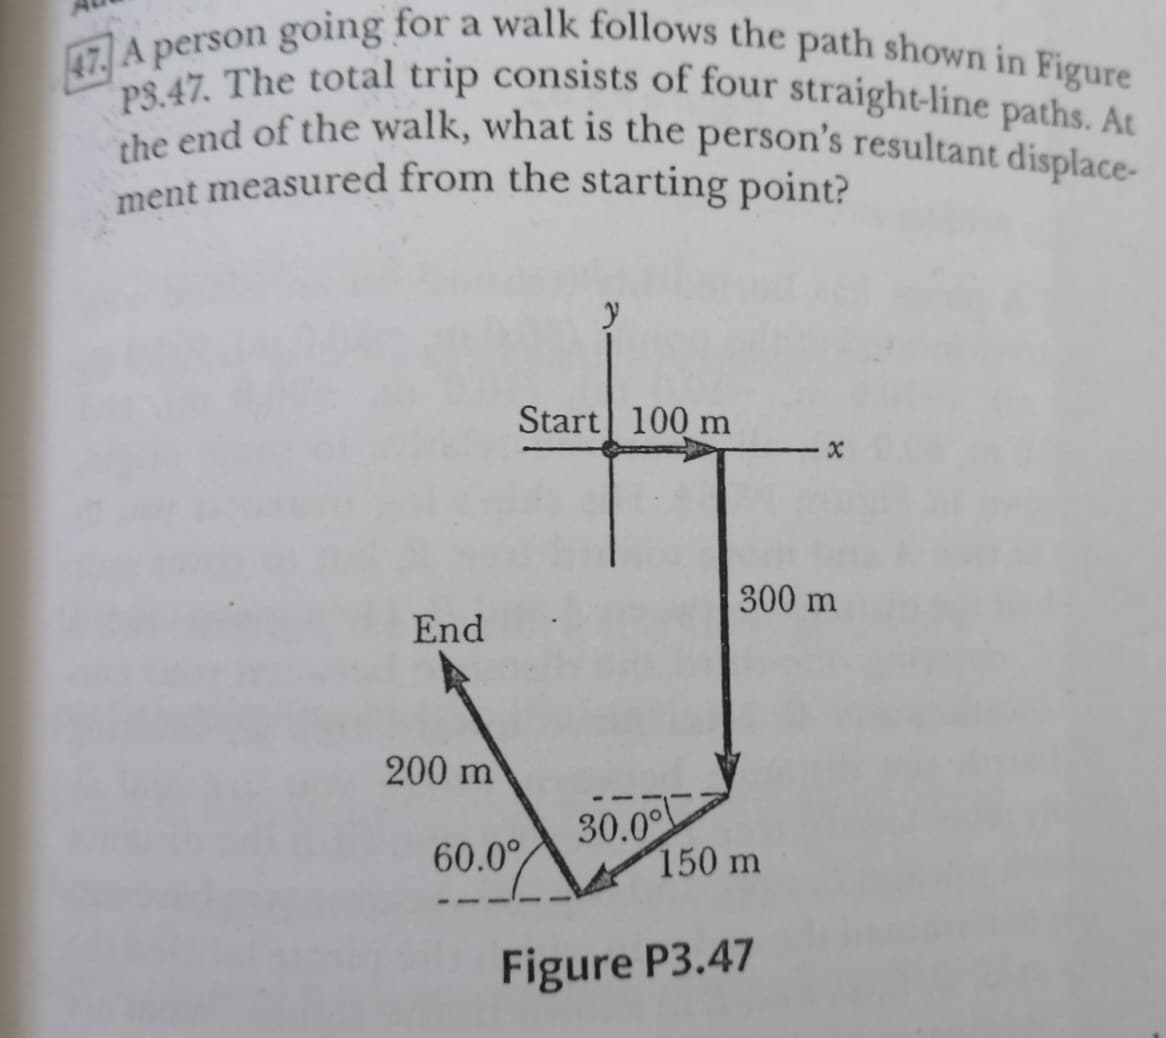 ment measured from the starting point?
47 A person going for a walk follows the path shown in Figure
PS.47. The total trip consists of four straight-line paths. At
the end of the walk, what is the person's resultant displace-
ent measured from the starting point?
Start 100 m
300 m
End
200 m
30.00
150 m
60.0°
Figure P3.47
